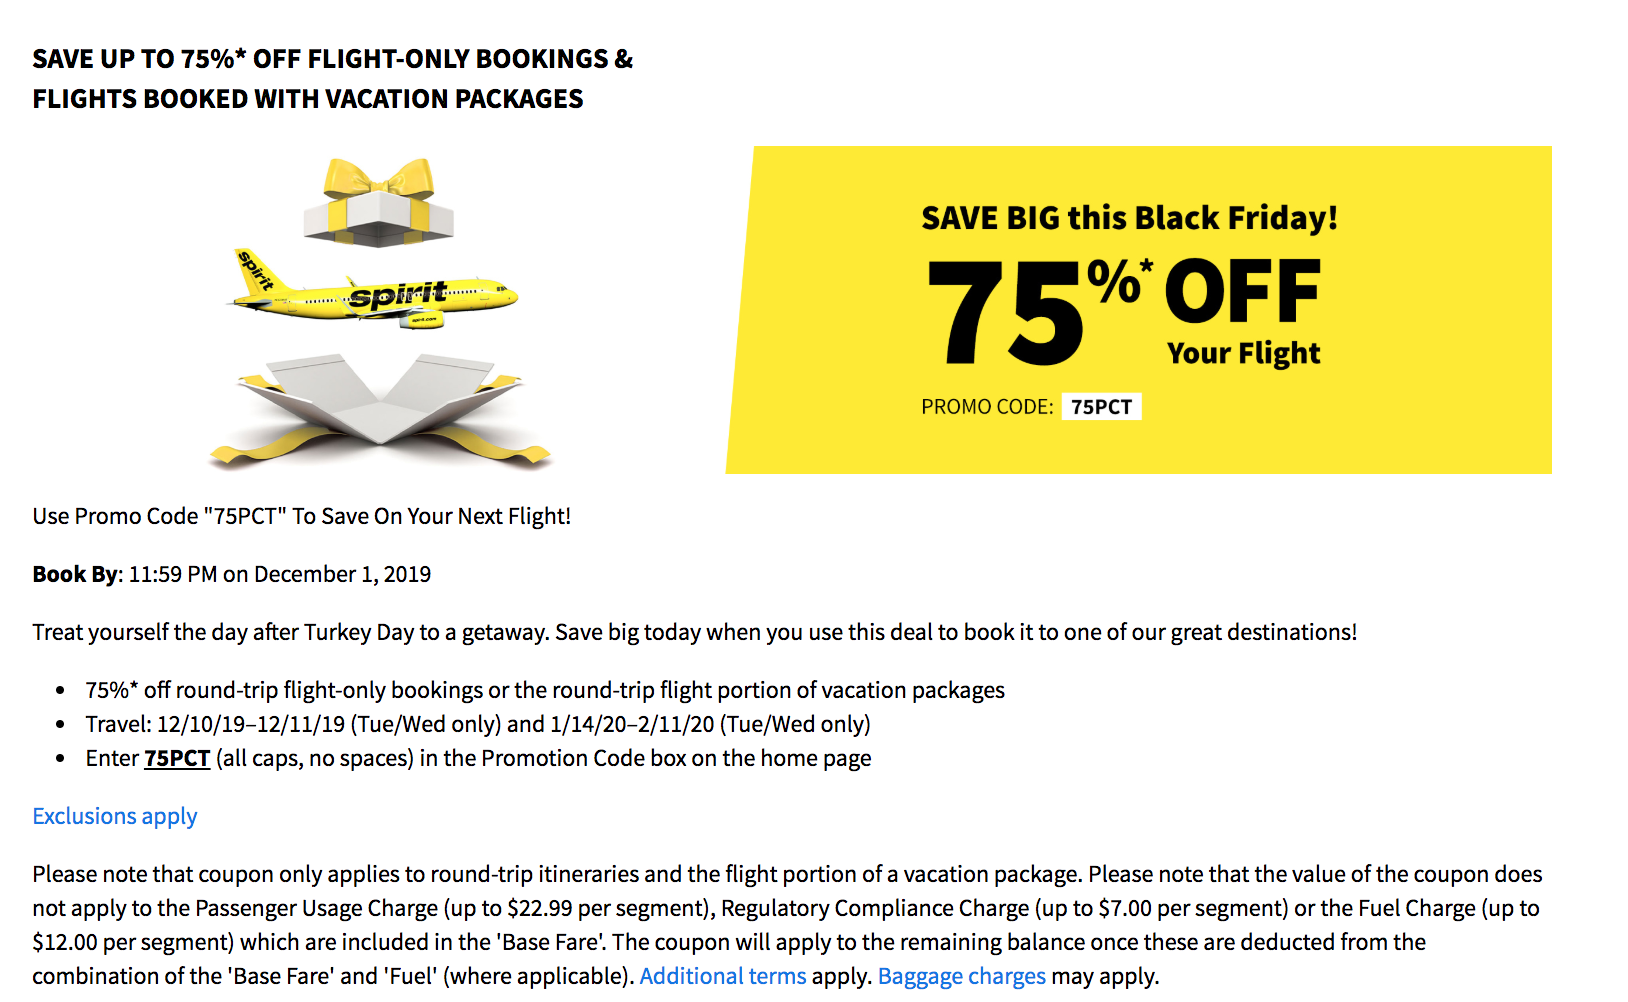 Spirit Black Friday is offering 75% off many routes